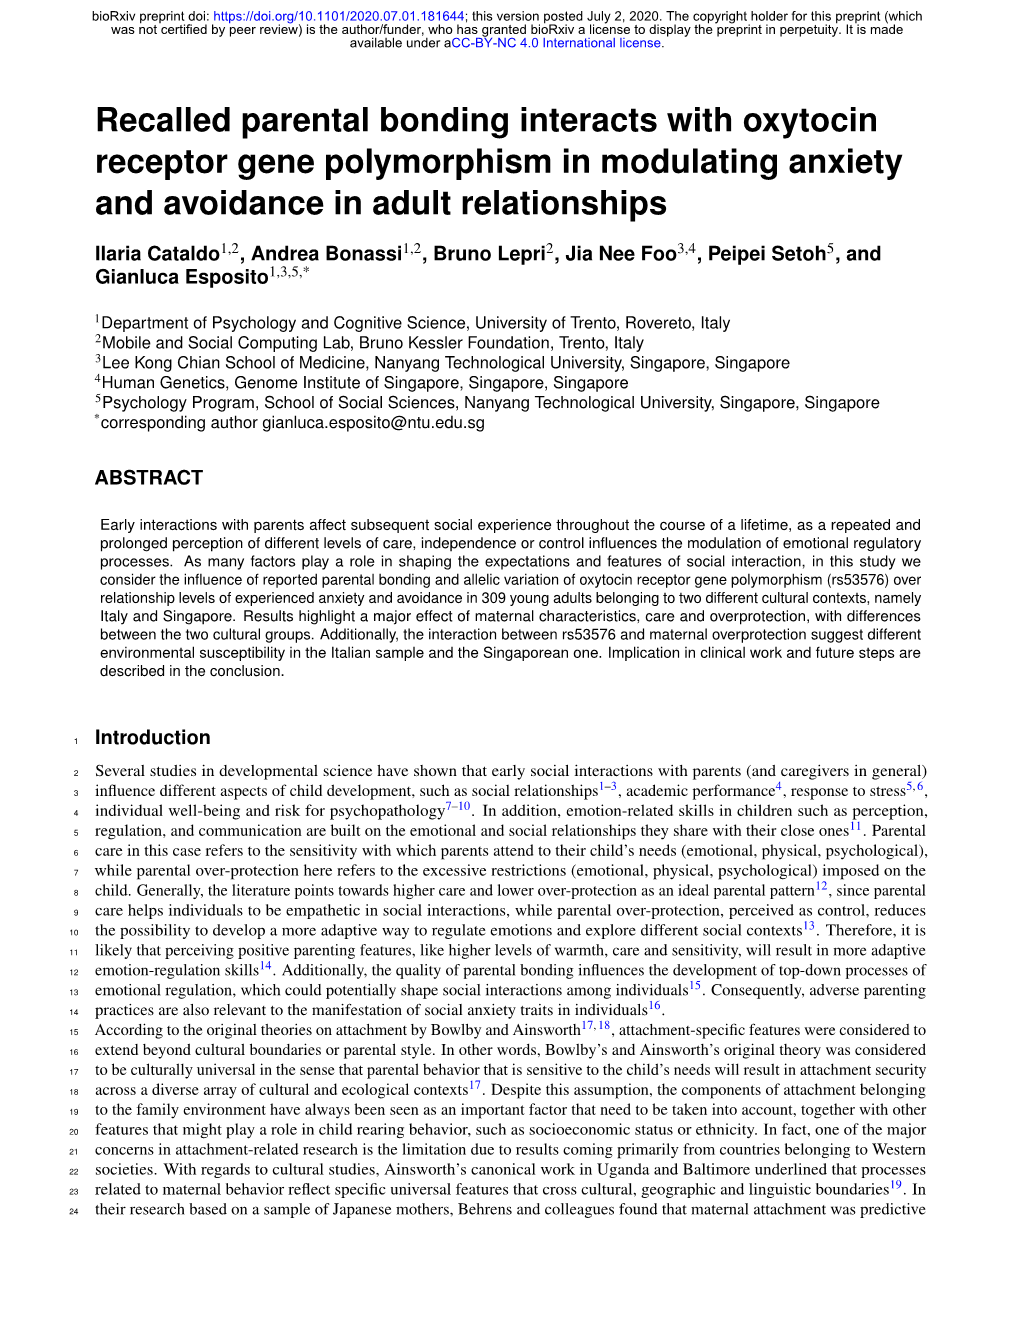 Recalled Parental Bonding Interacts with Oxytocin Receptor Gene Polymorphism in Modulating Anxiety and Avoidance in Adult Relationships